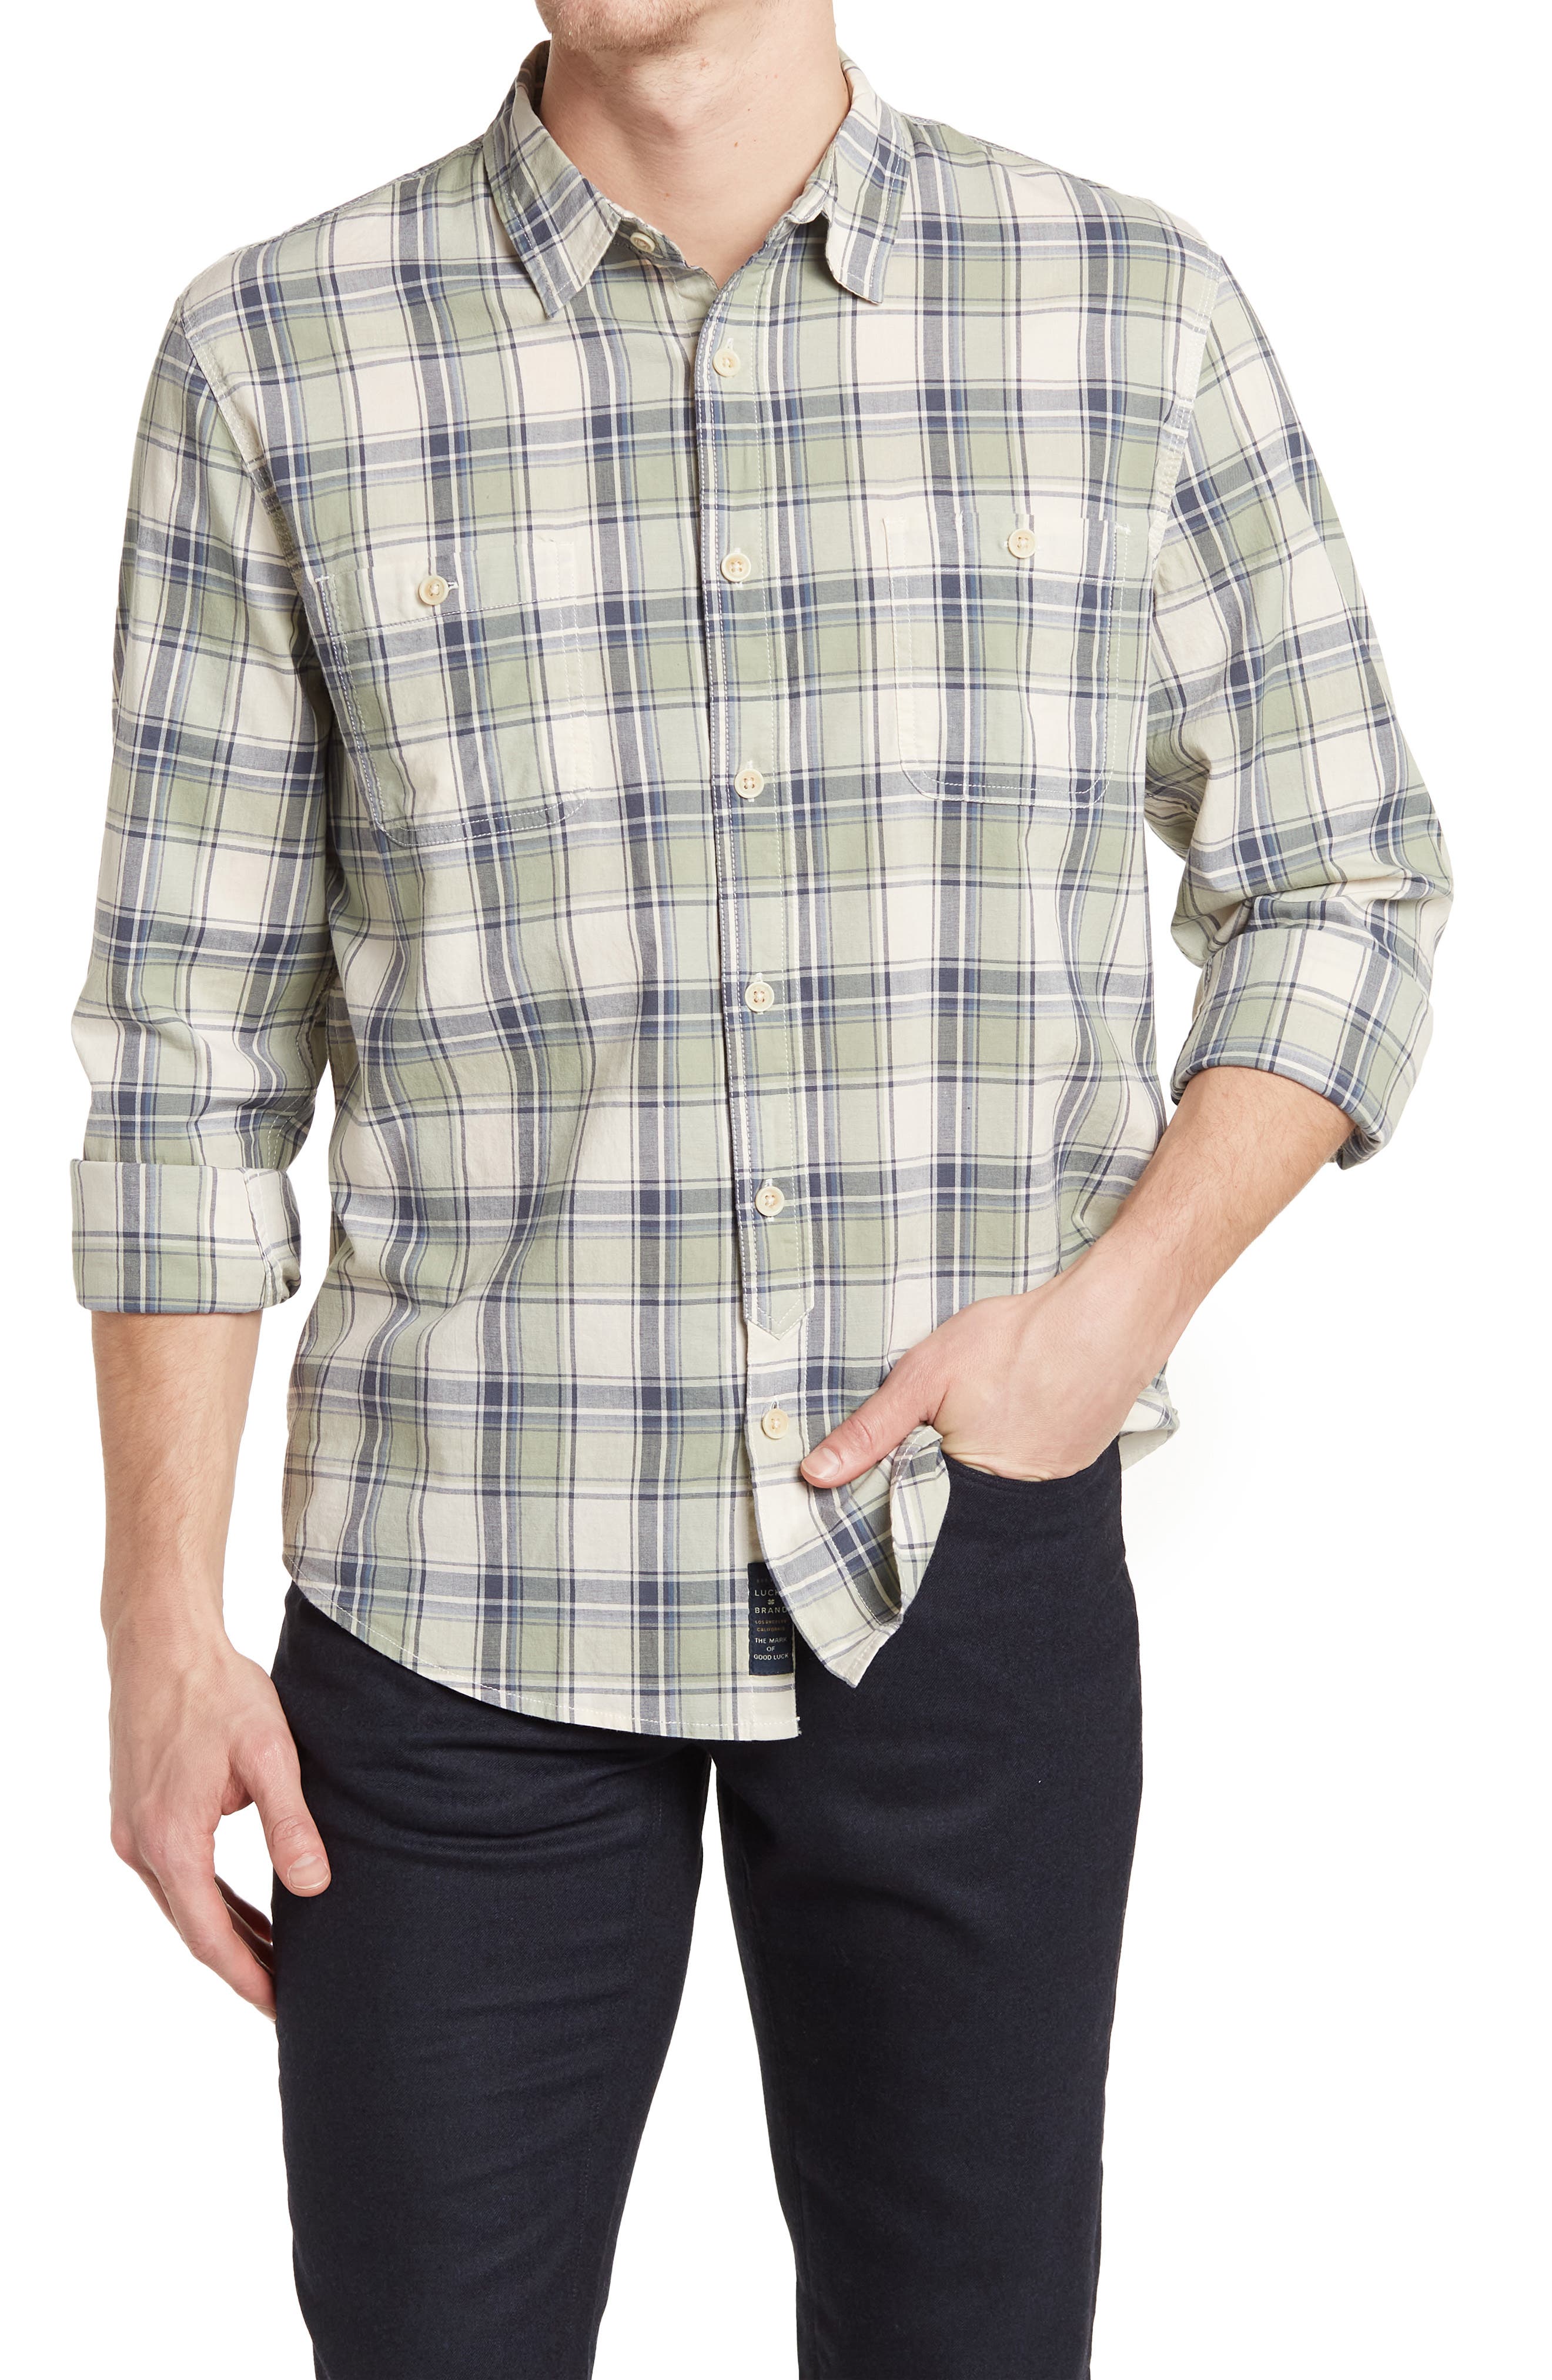 Men's Clearance Button Down Shirts ...